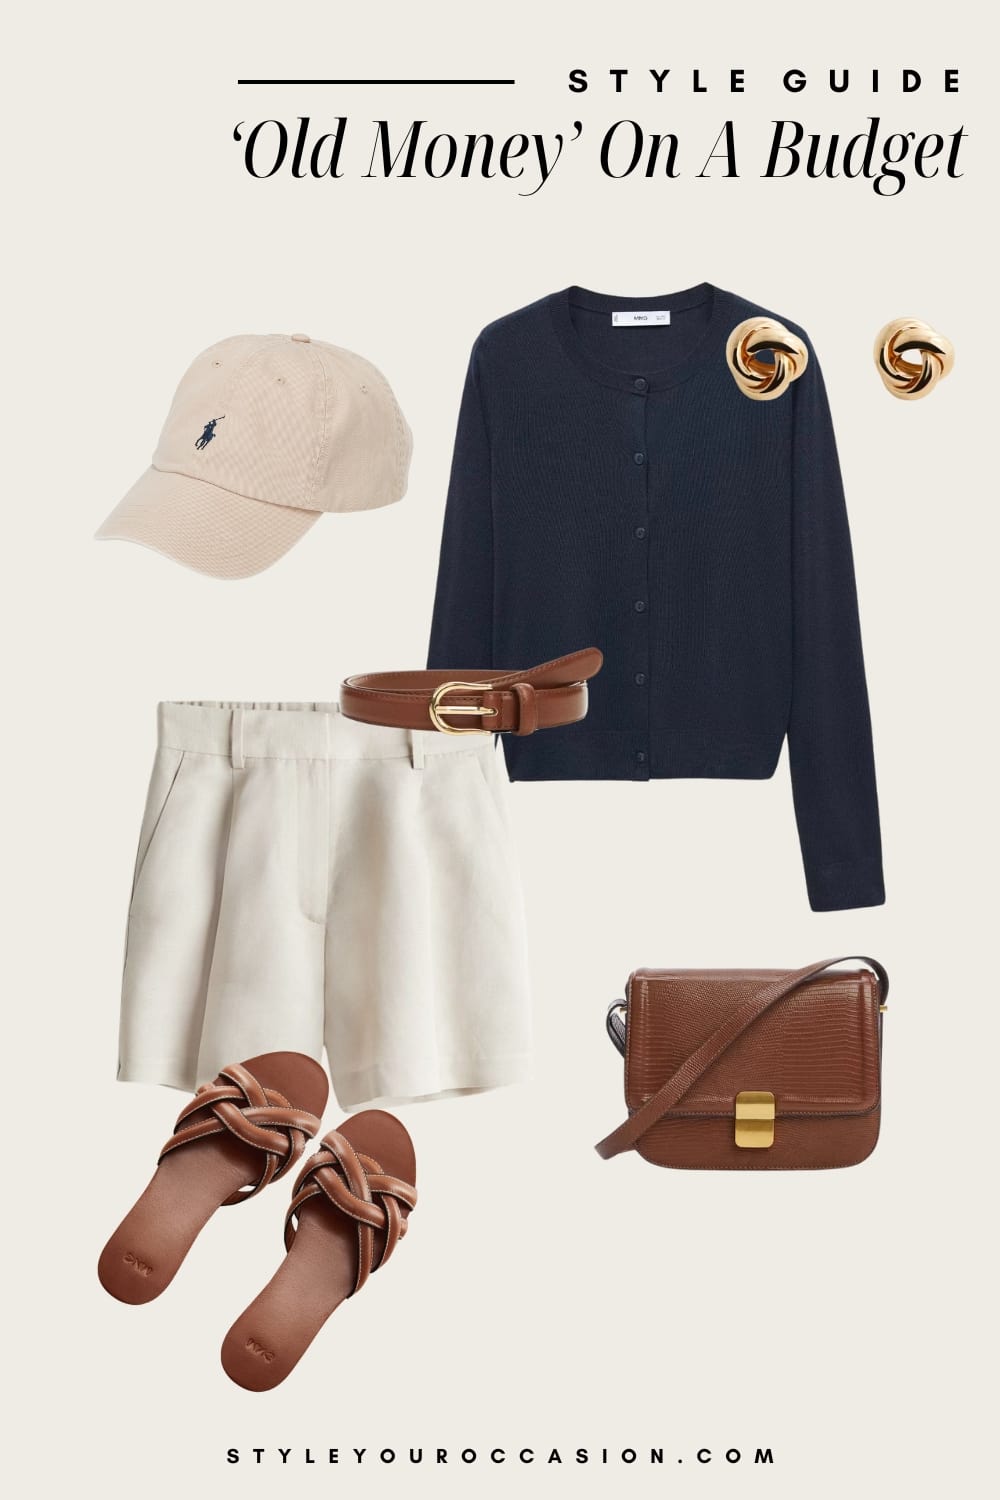 an image board of an old money outfit featuring pleated beige shorts, a navy cardigan, a beige baseball cap, cognac leather sandals, and leather and gold accessories